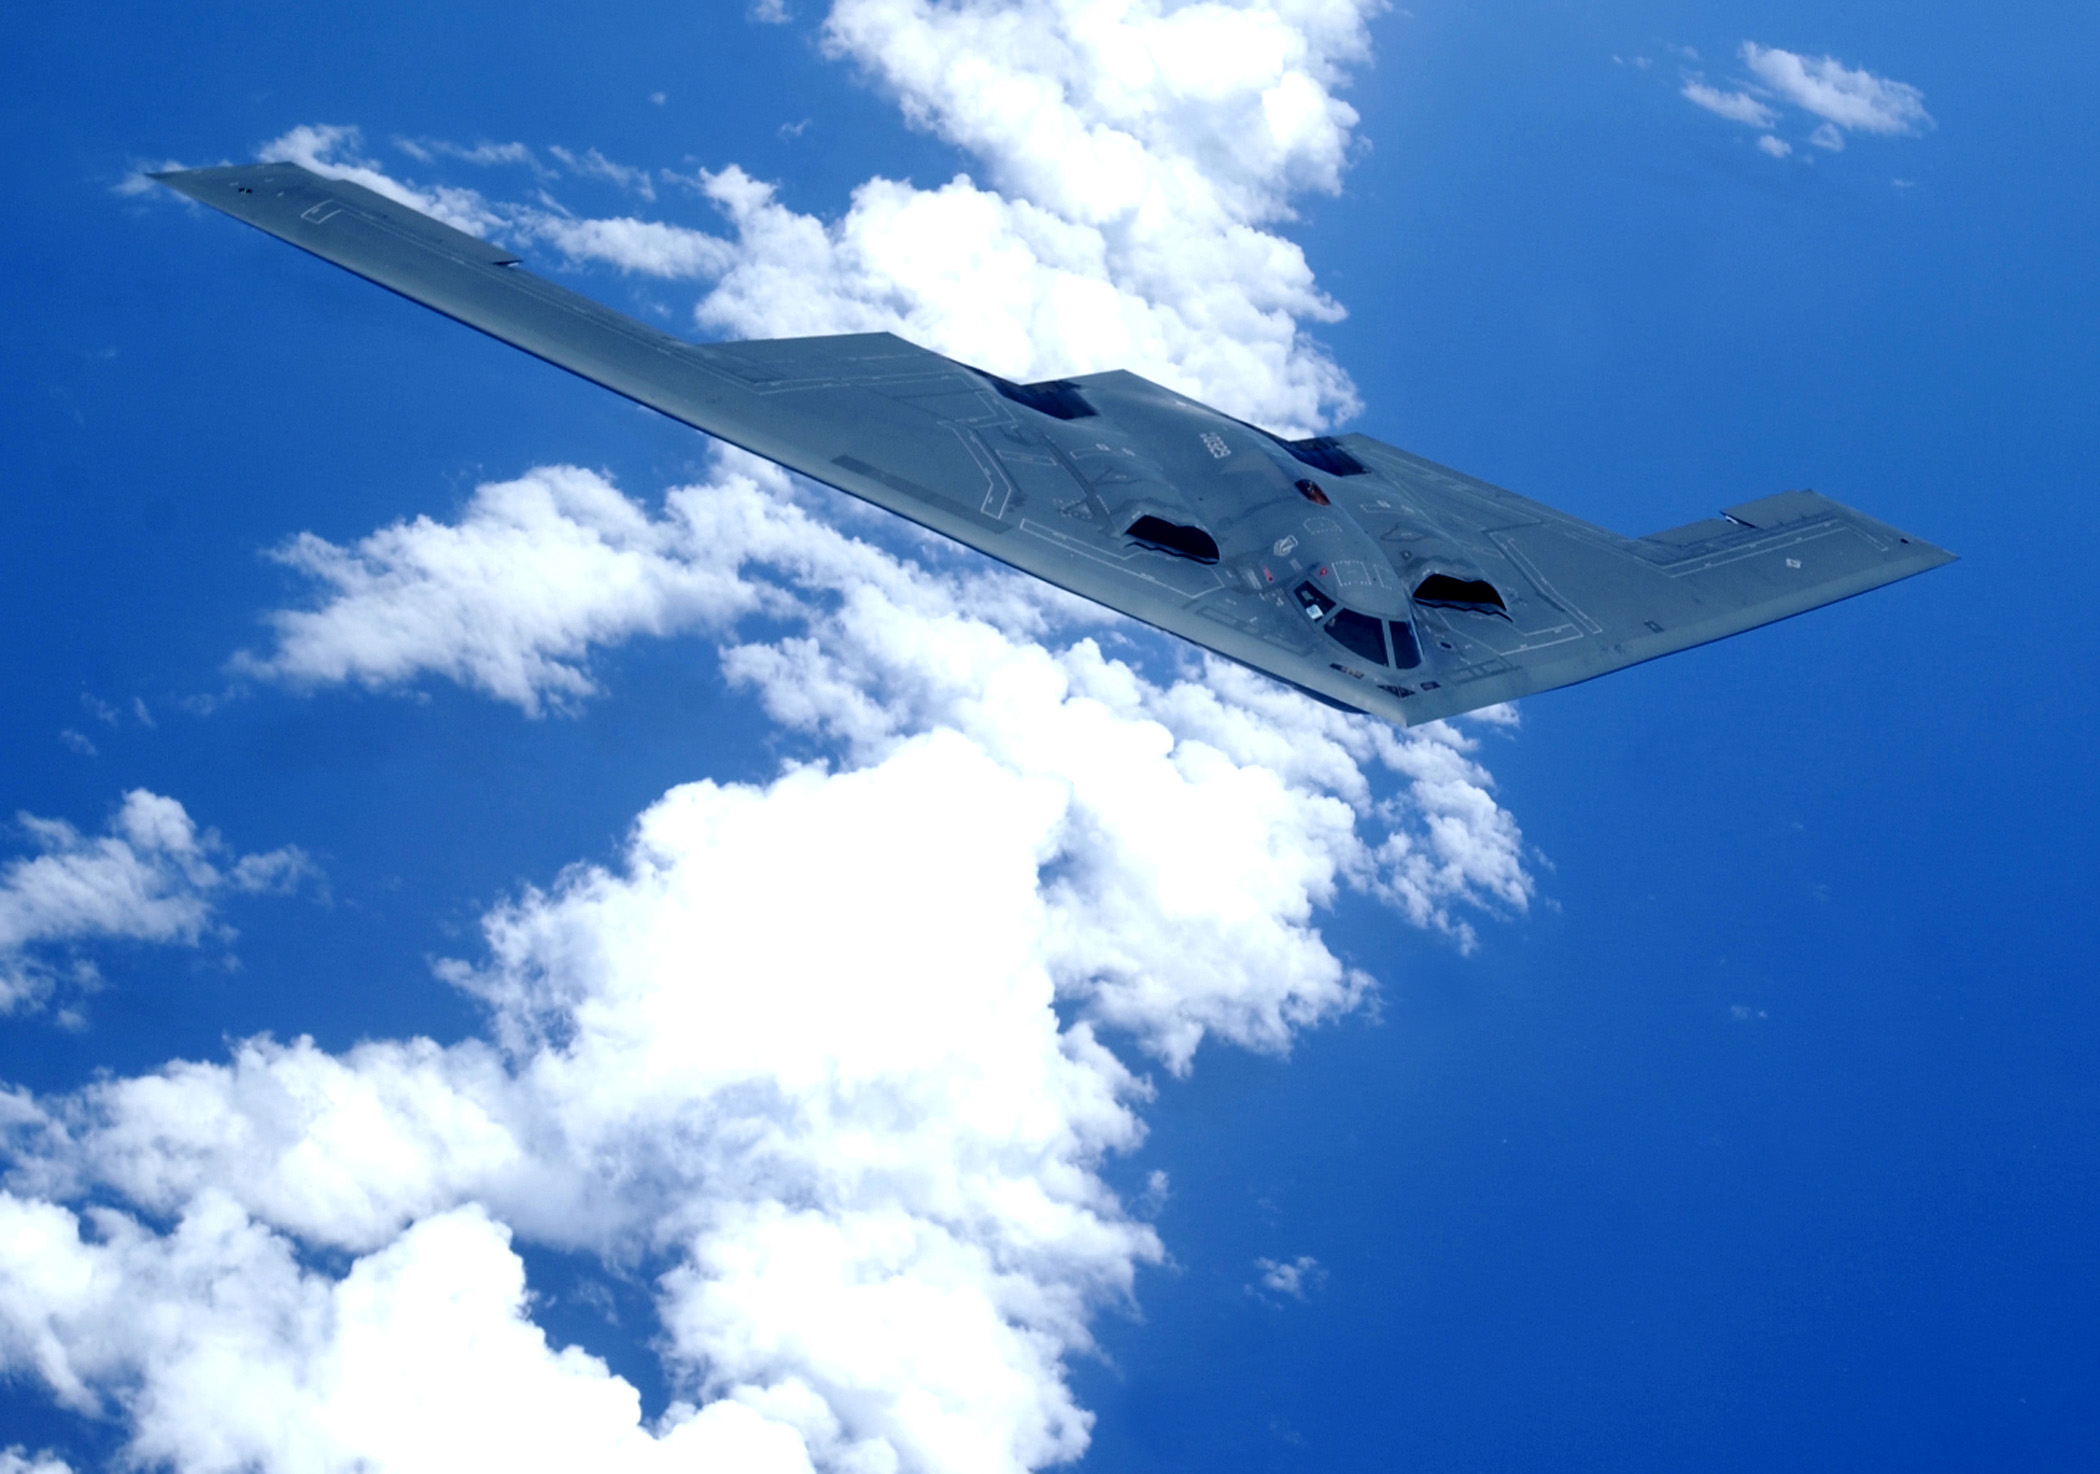 Watch A B-2 Bomber Refuel And Return To Stealth Mode [Video]